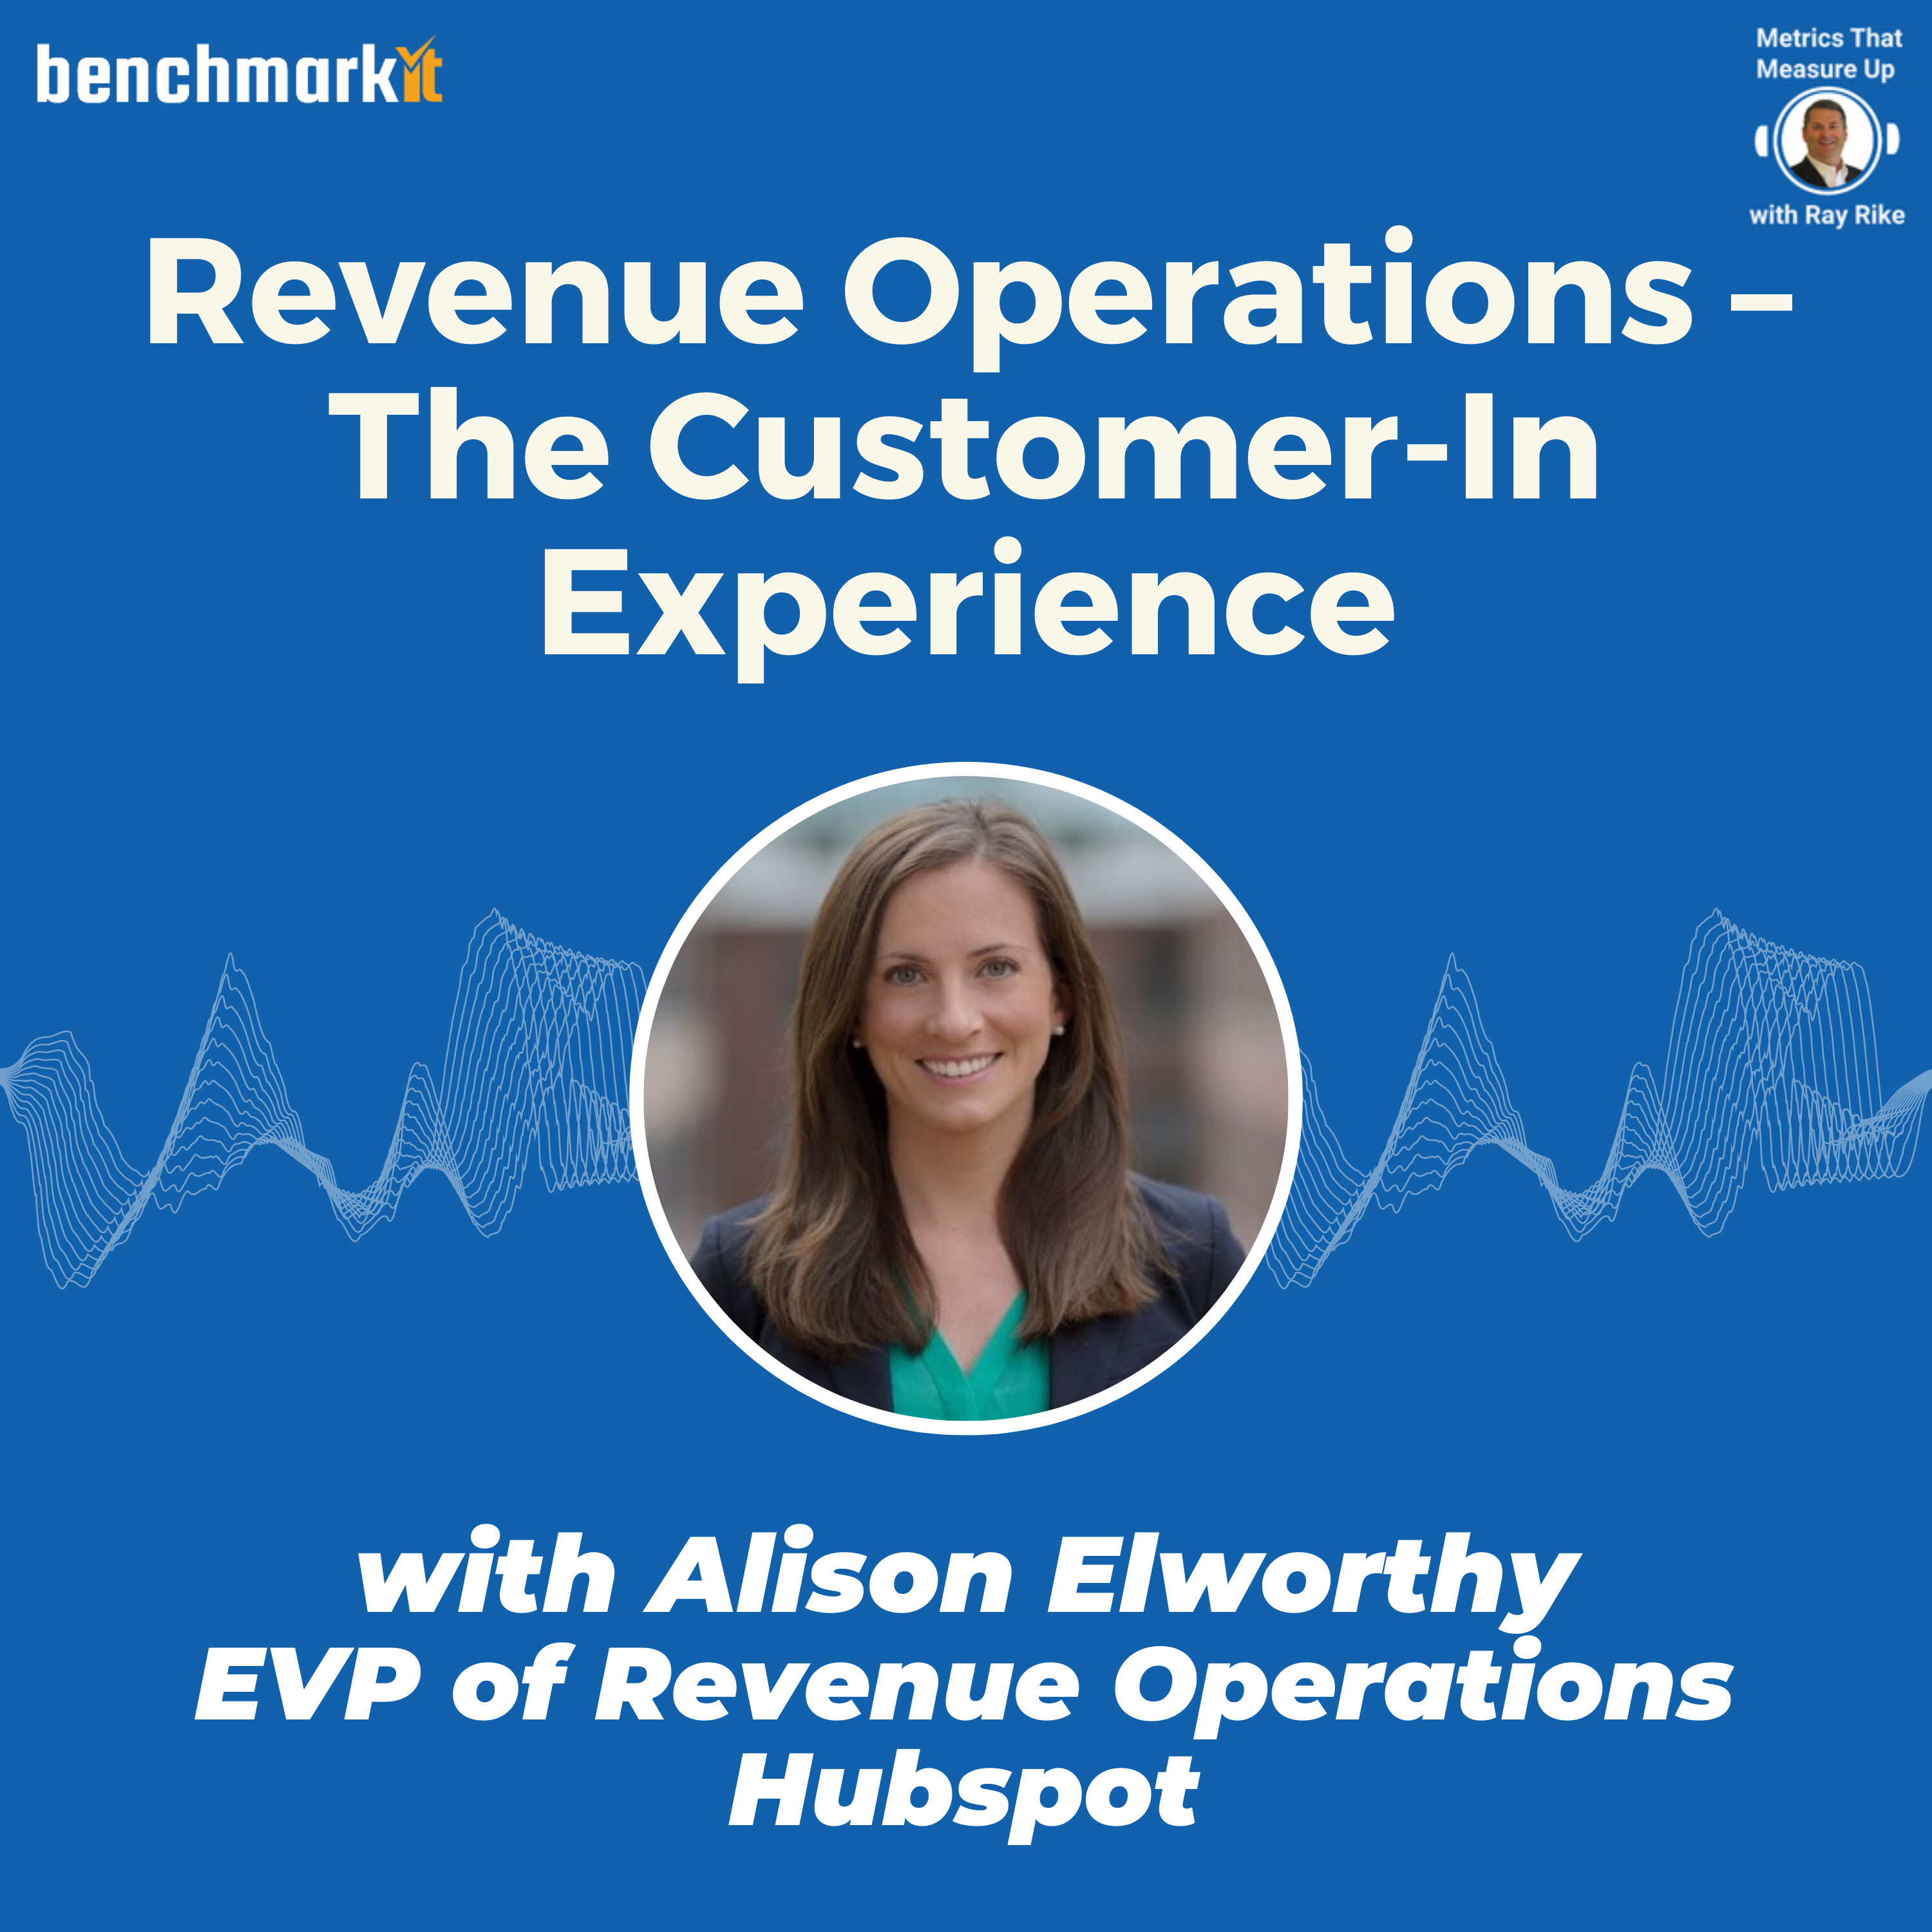 Customer-In Revenue Operations - with Alison Elworthy, EVP Revenue Operations - HubSpot